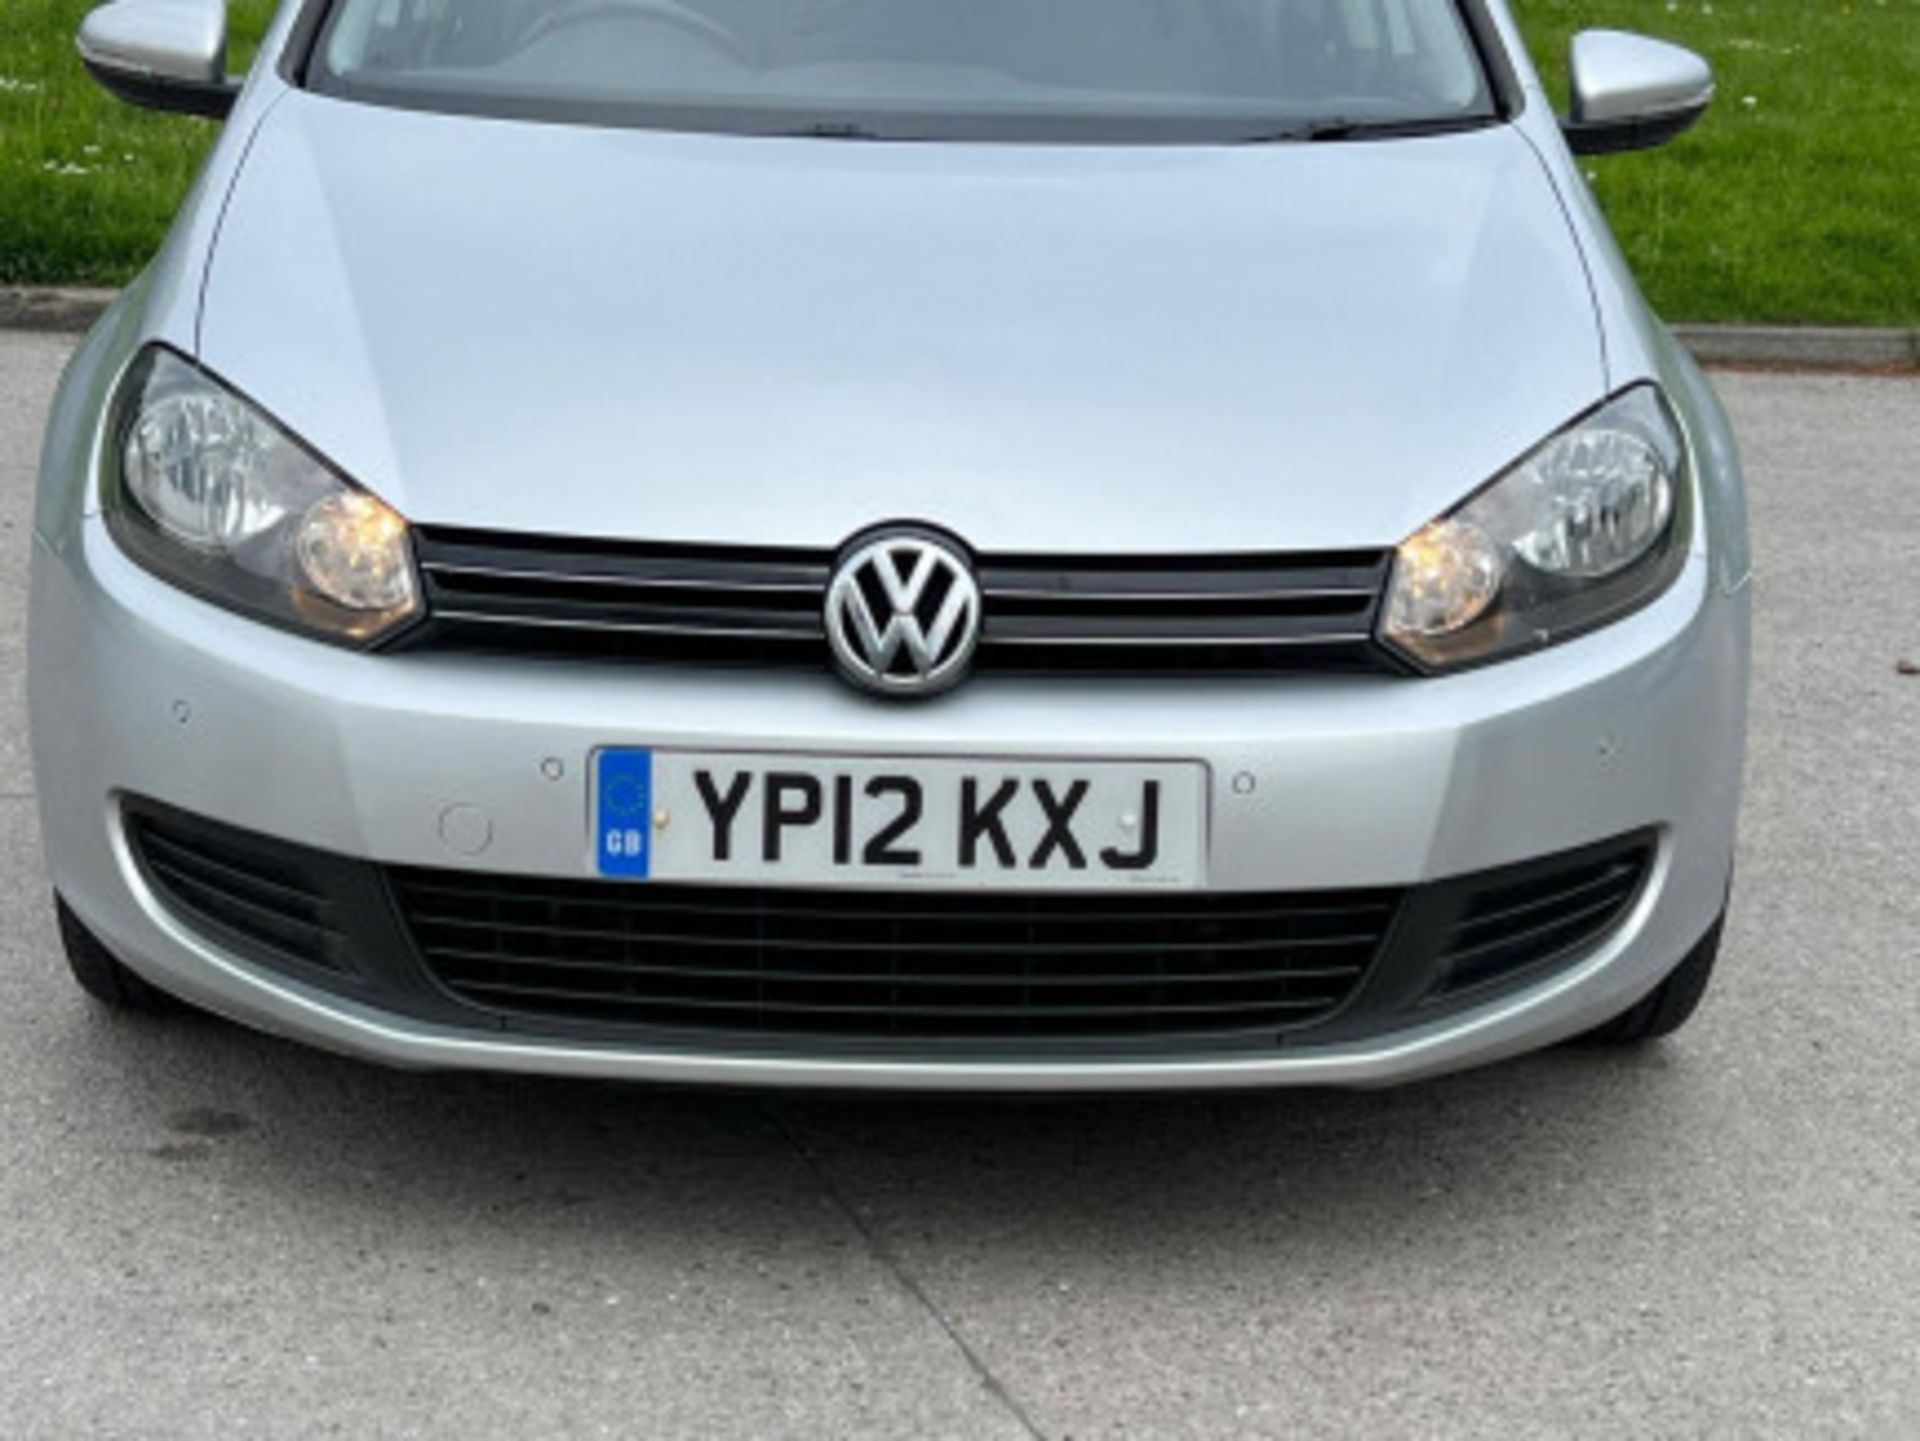 IMPECCABLE 2012 VOLKSWAGEN GOLF 1.6 TDI MATCH >>--NO VAT ON HAMMER--<< - Image 53 of 116